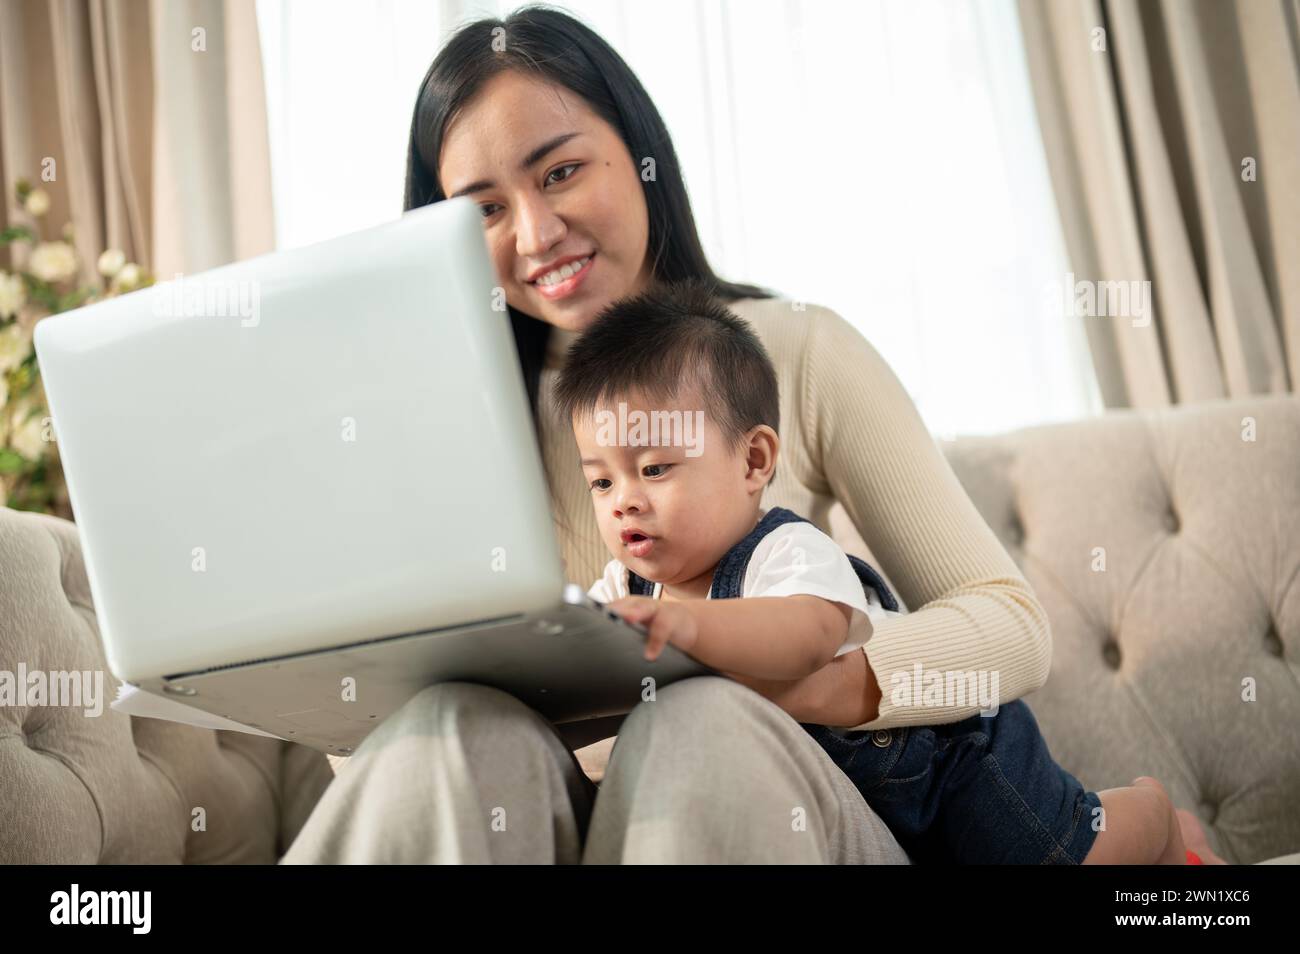 A happy Asian businesswoman mom is working from home, working on her laptop, and taking care of her naughty baby boy. Stock Photo